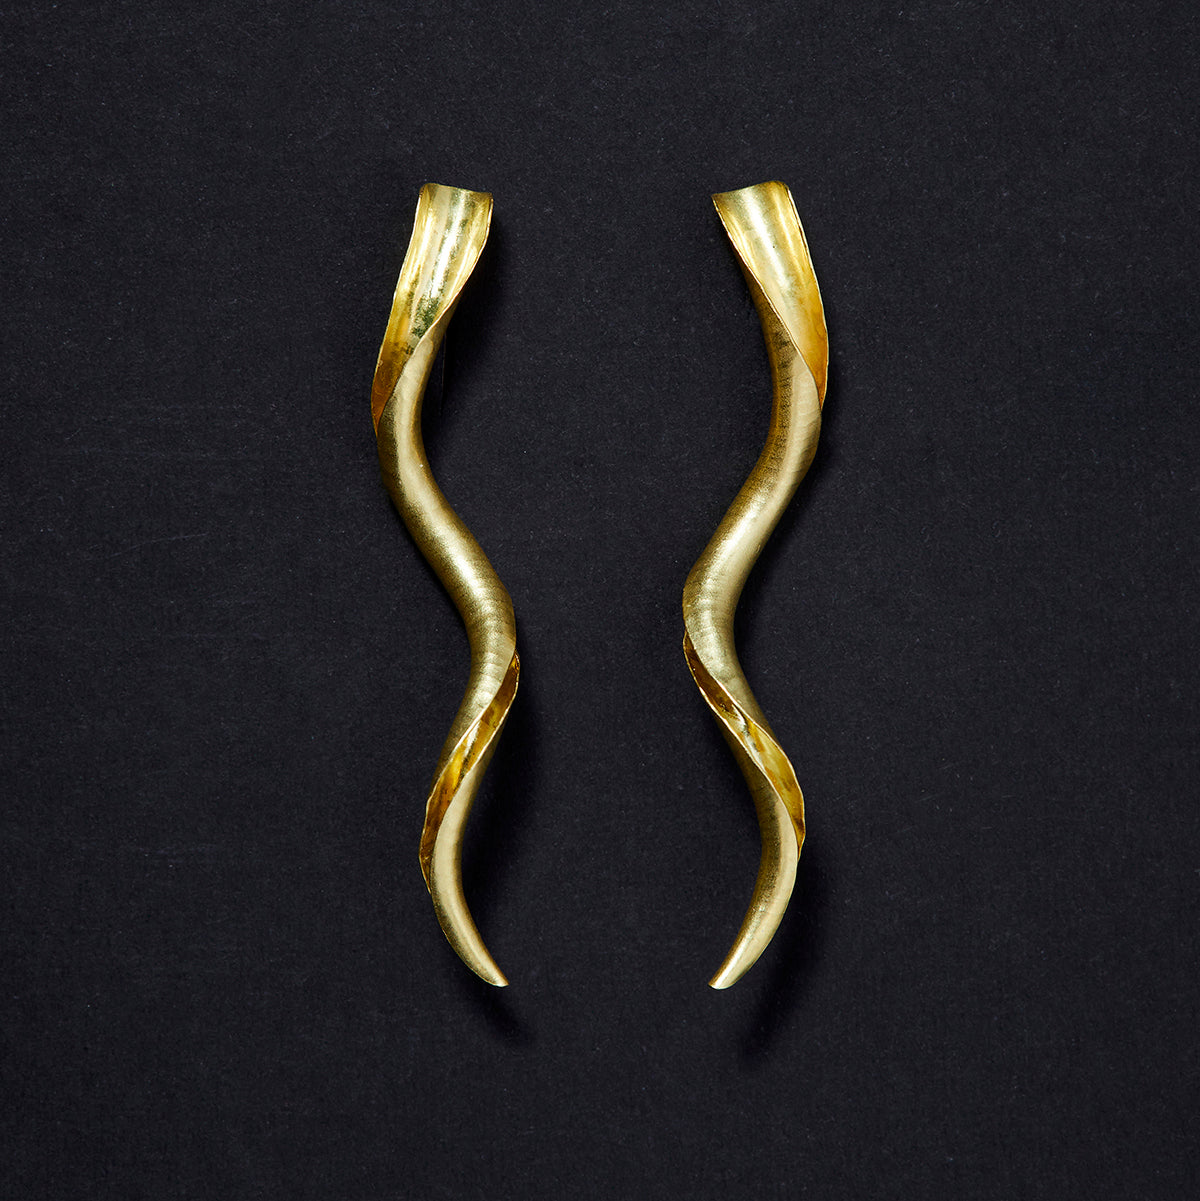 A pair of mirror image gold spiral stud earrings, each in the form of a tapered spiralling tube with one side open to show the inner surface. They have a satin matte finish and hammered texture.